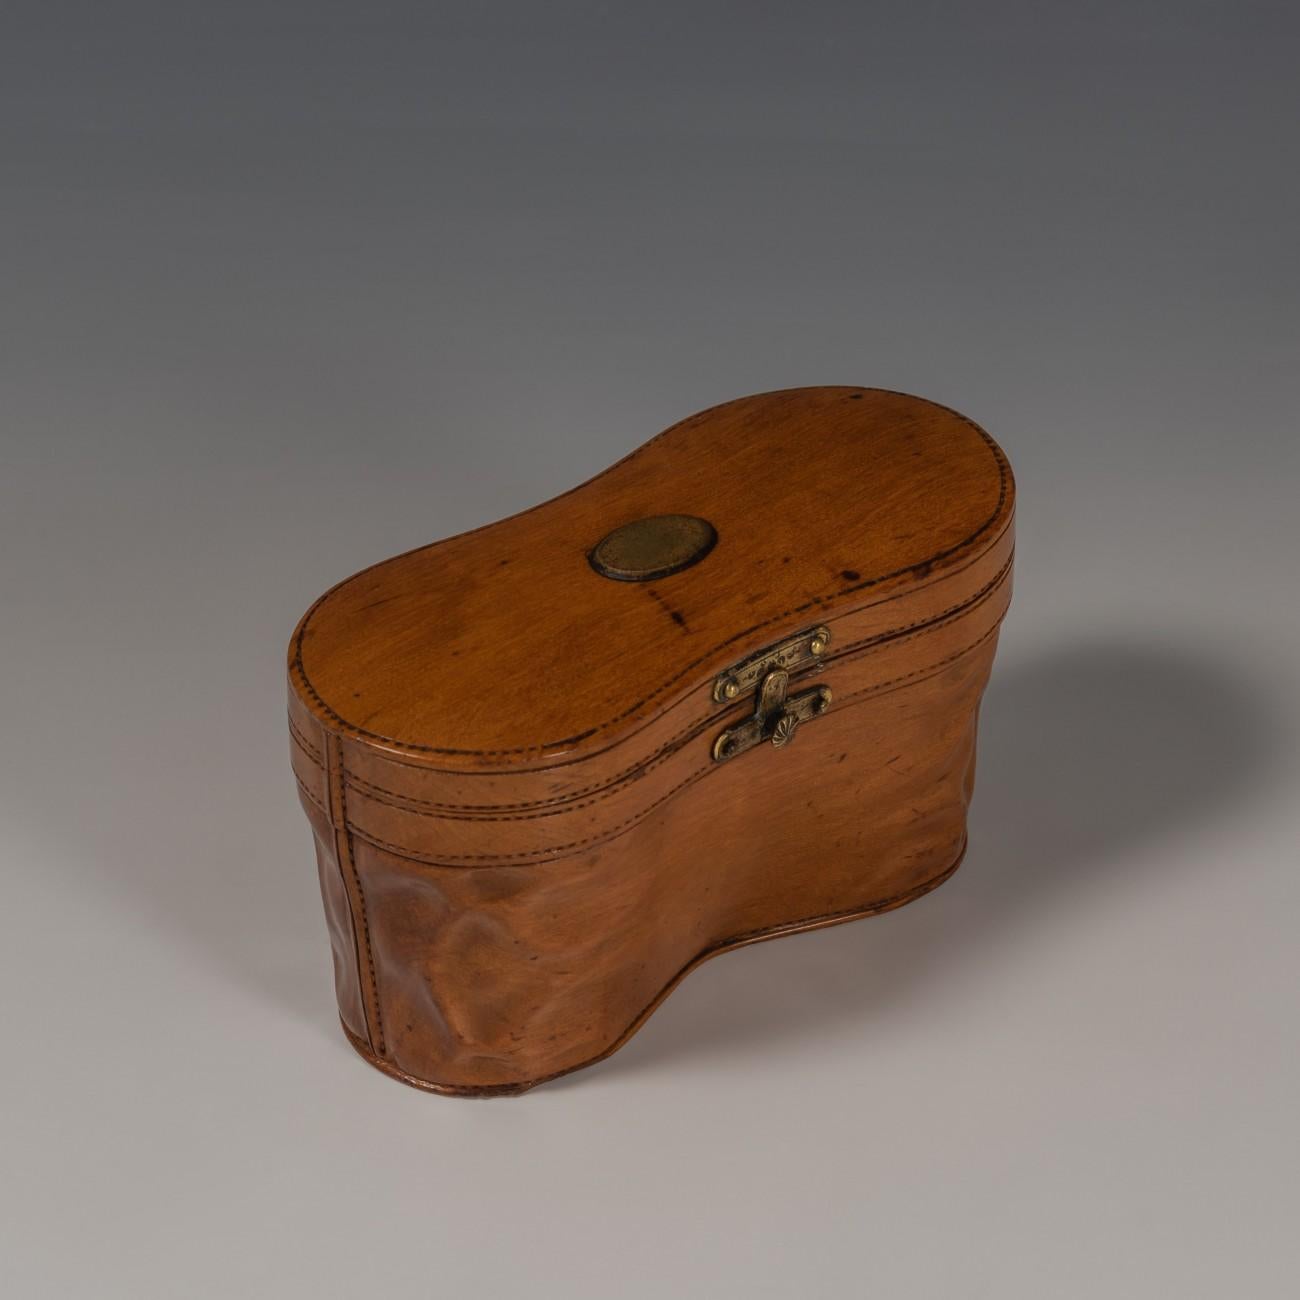 Intricately carved in fruitwood, modelled as a leather case for opera glasses, circa 1900. Lifting the lid reveals two glass inkwells. This exquisitely crafted piece was originally made as a travel item, before the days of fountain